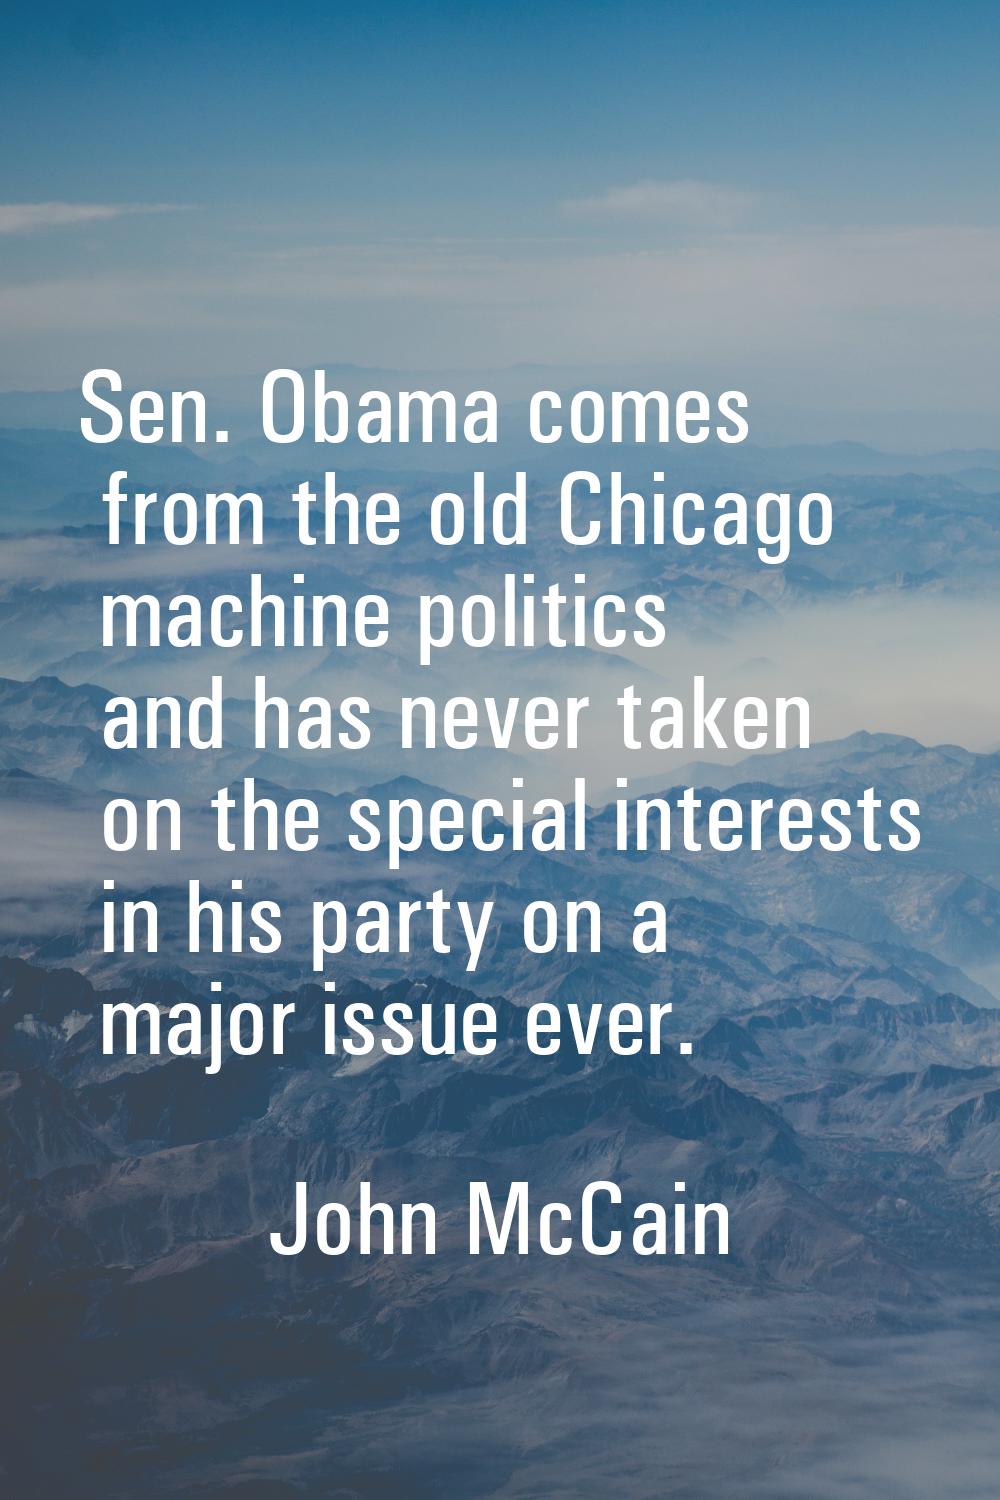 Sen. Obama comes from the old Chicago machine politics and has never taken on the special interests